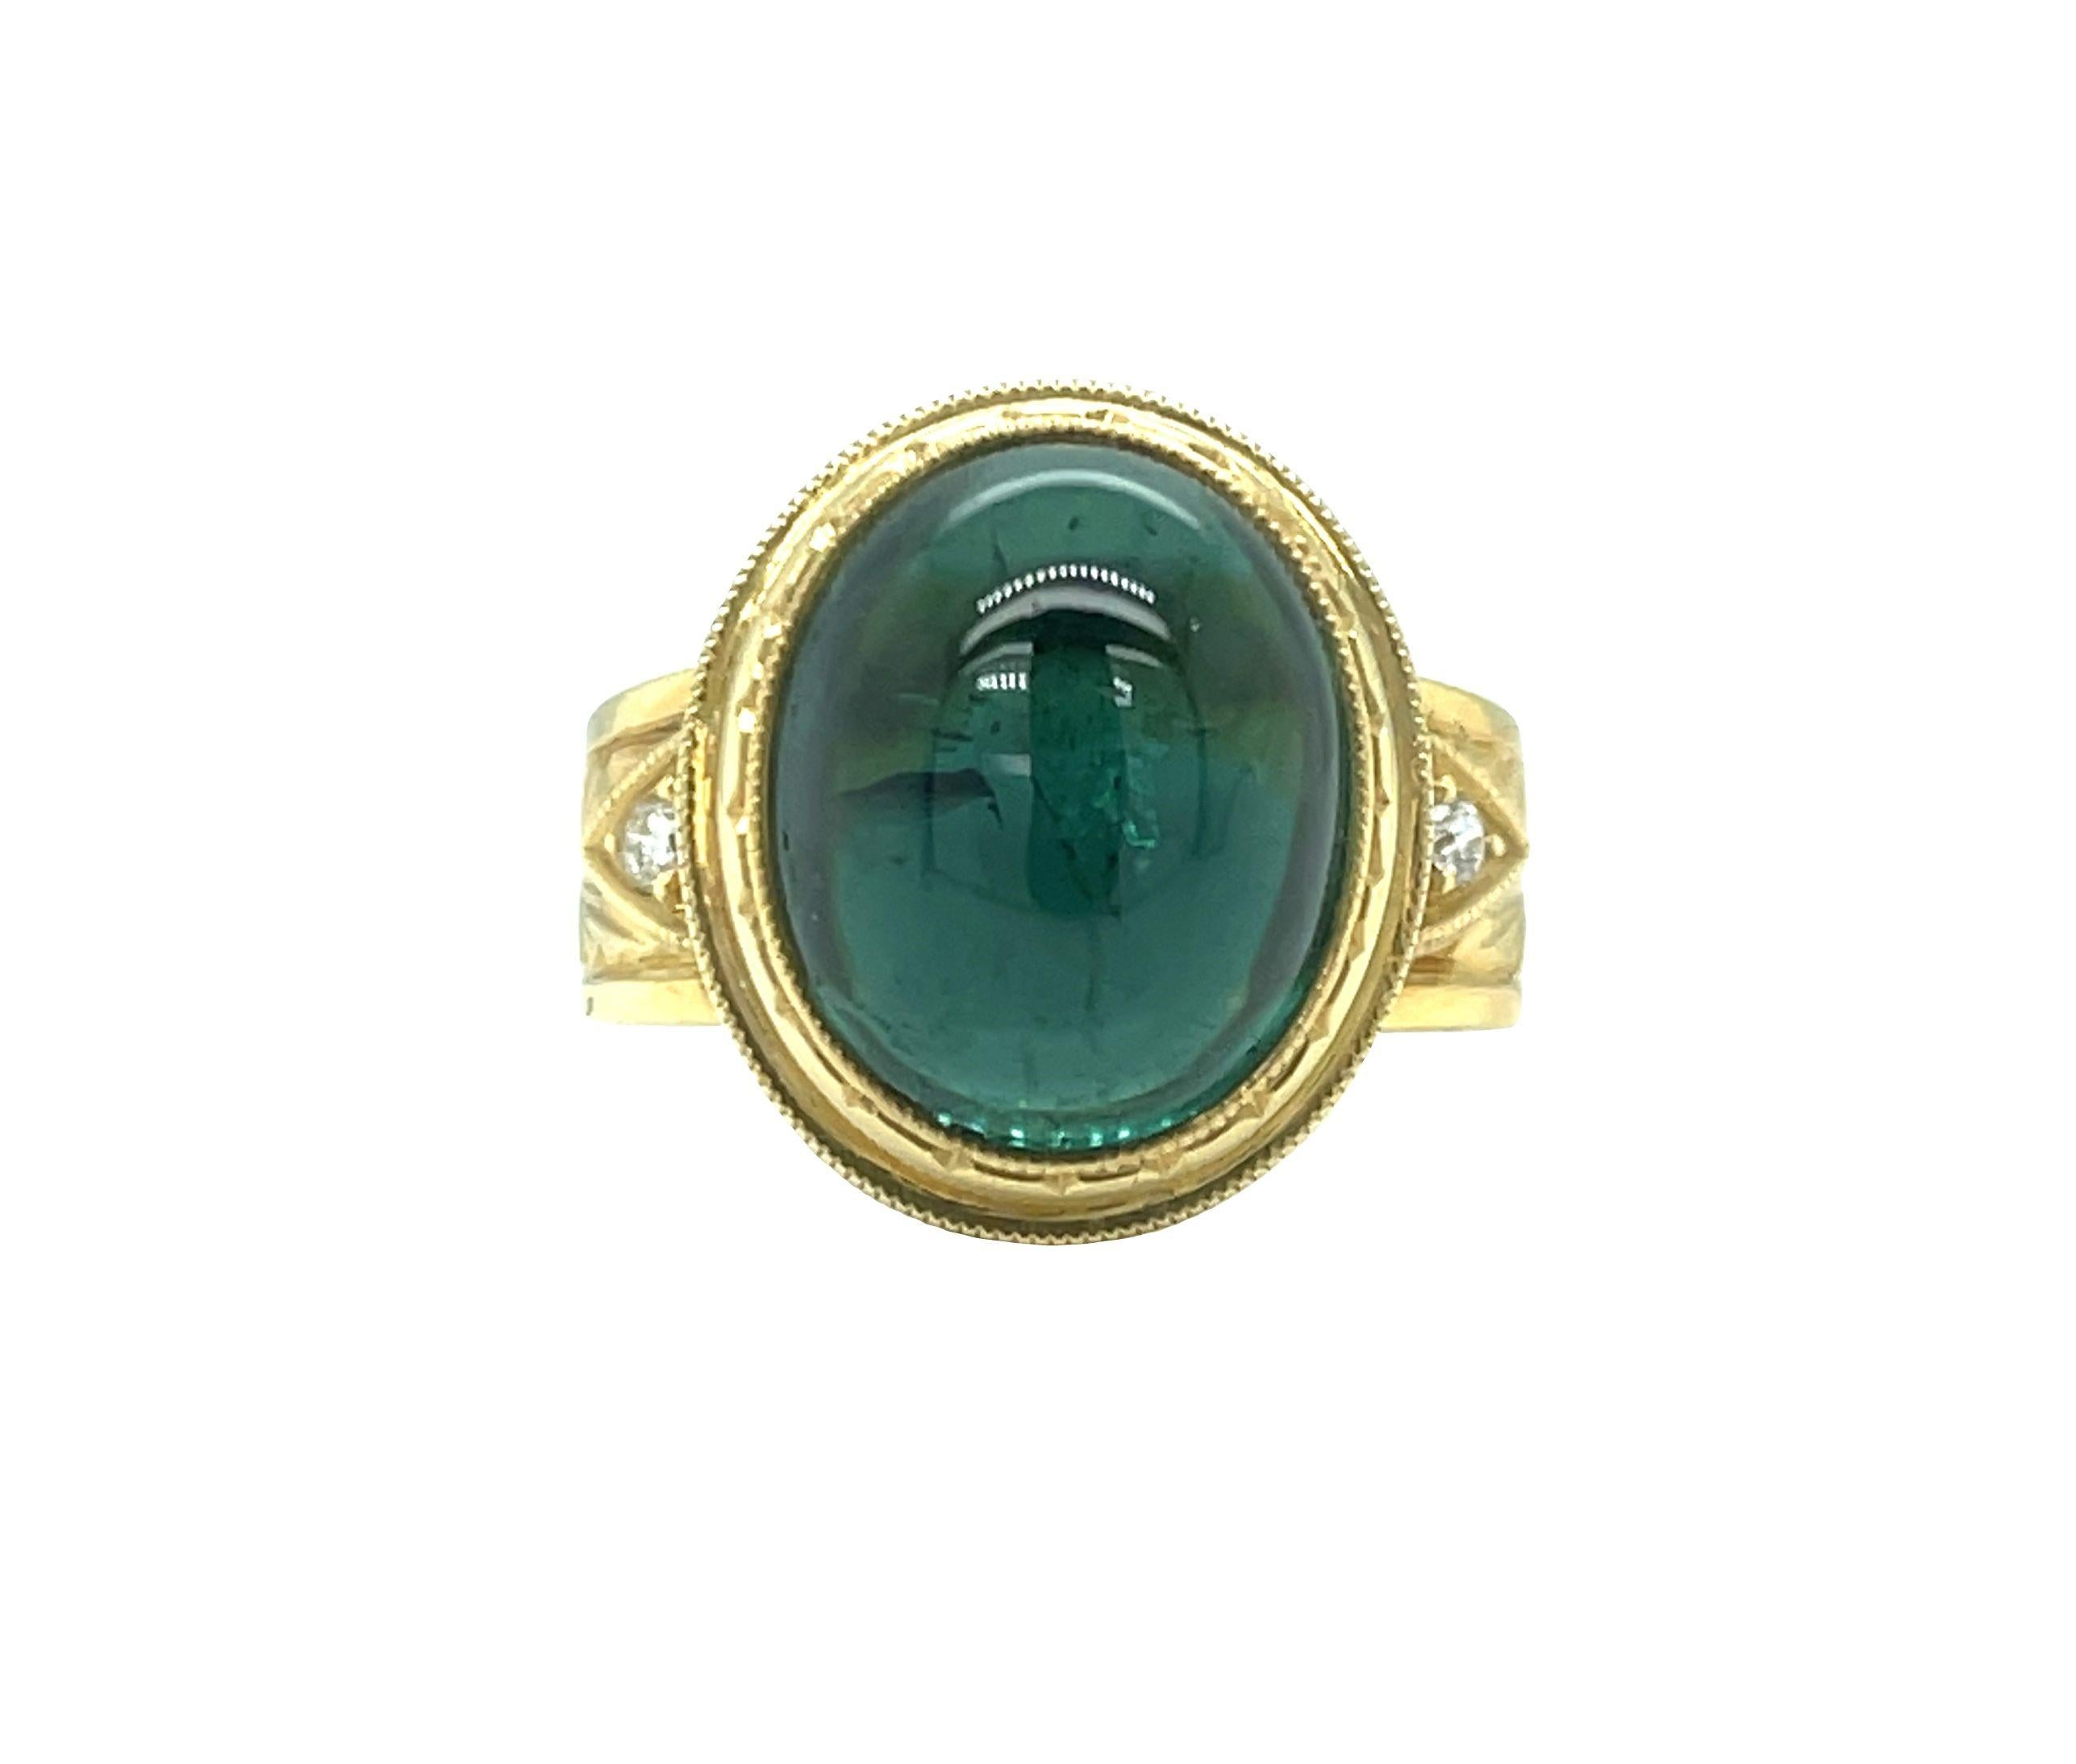 This exquisite, regal-looking dome ring features a fine, 9.80 carat oval green tourmaline cabochon set in a beautifully handmade, hand engraved bezel. The tourmaline has a rich, bluish green body color and has excellent clarity and transparency. The